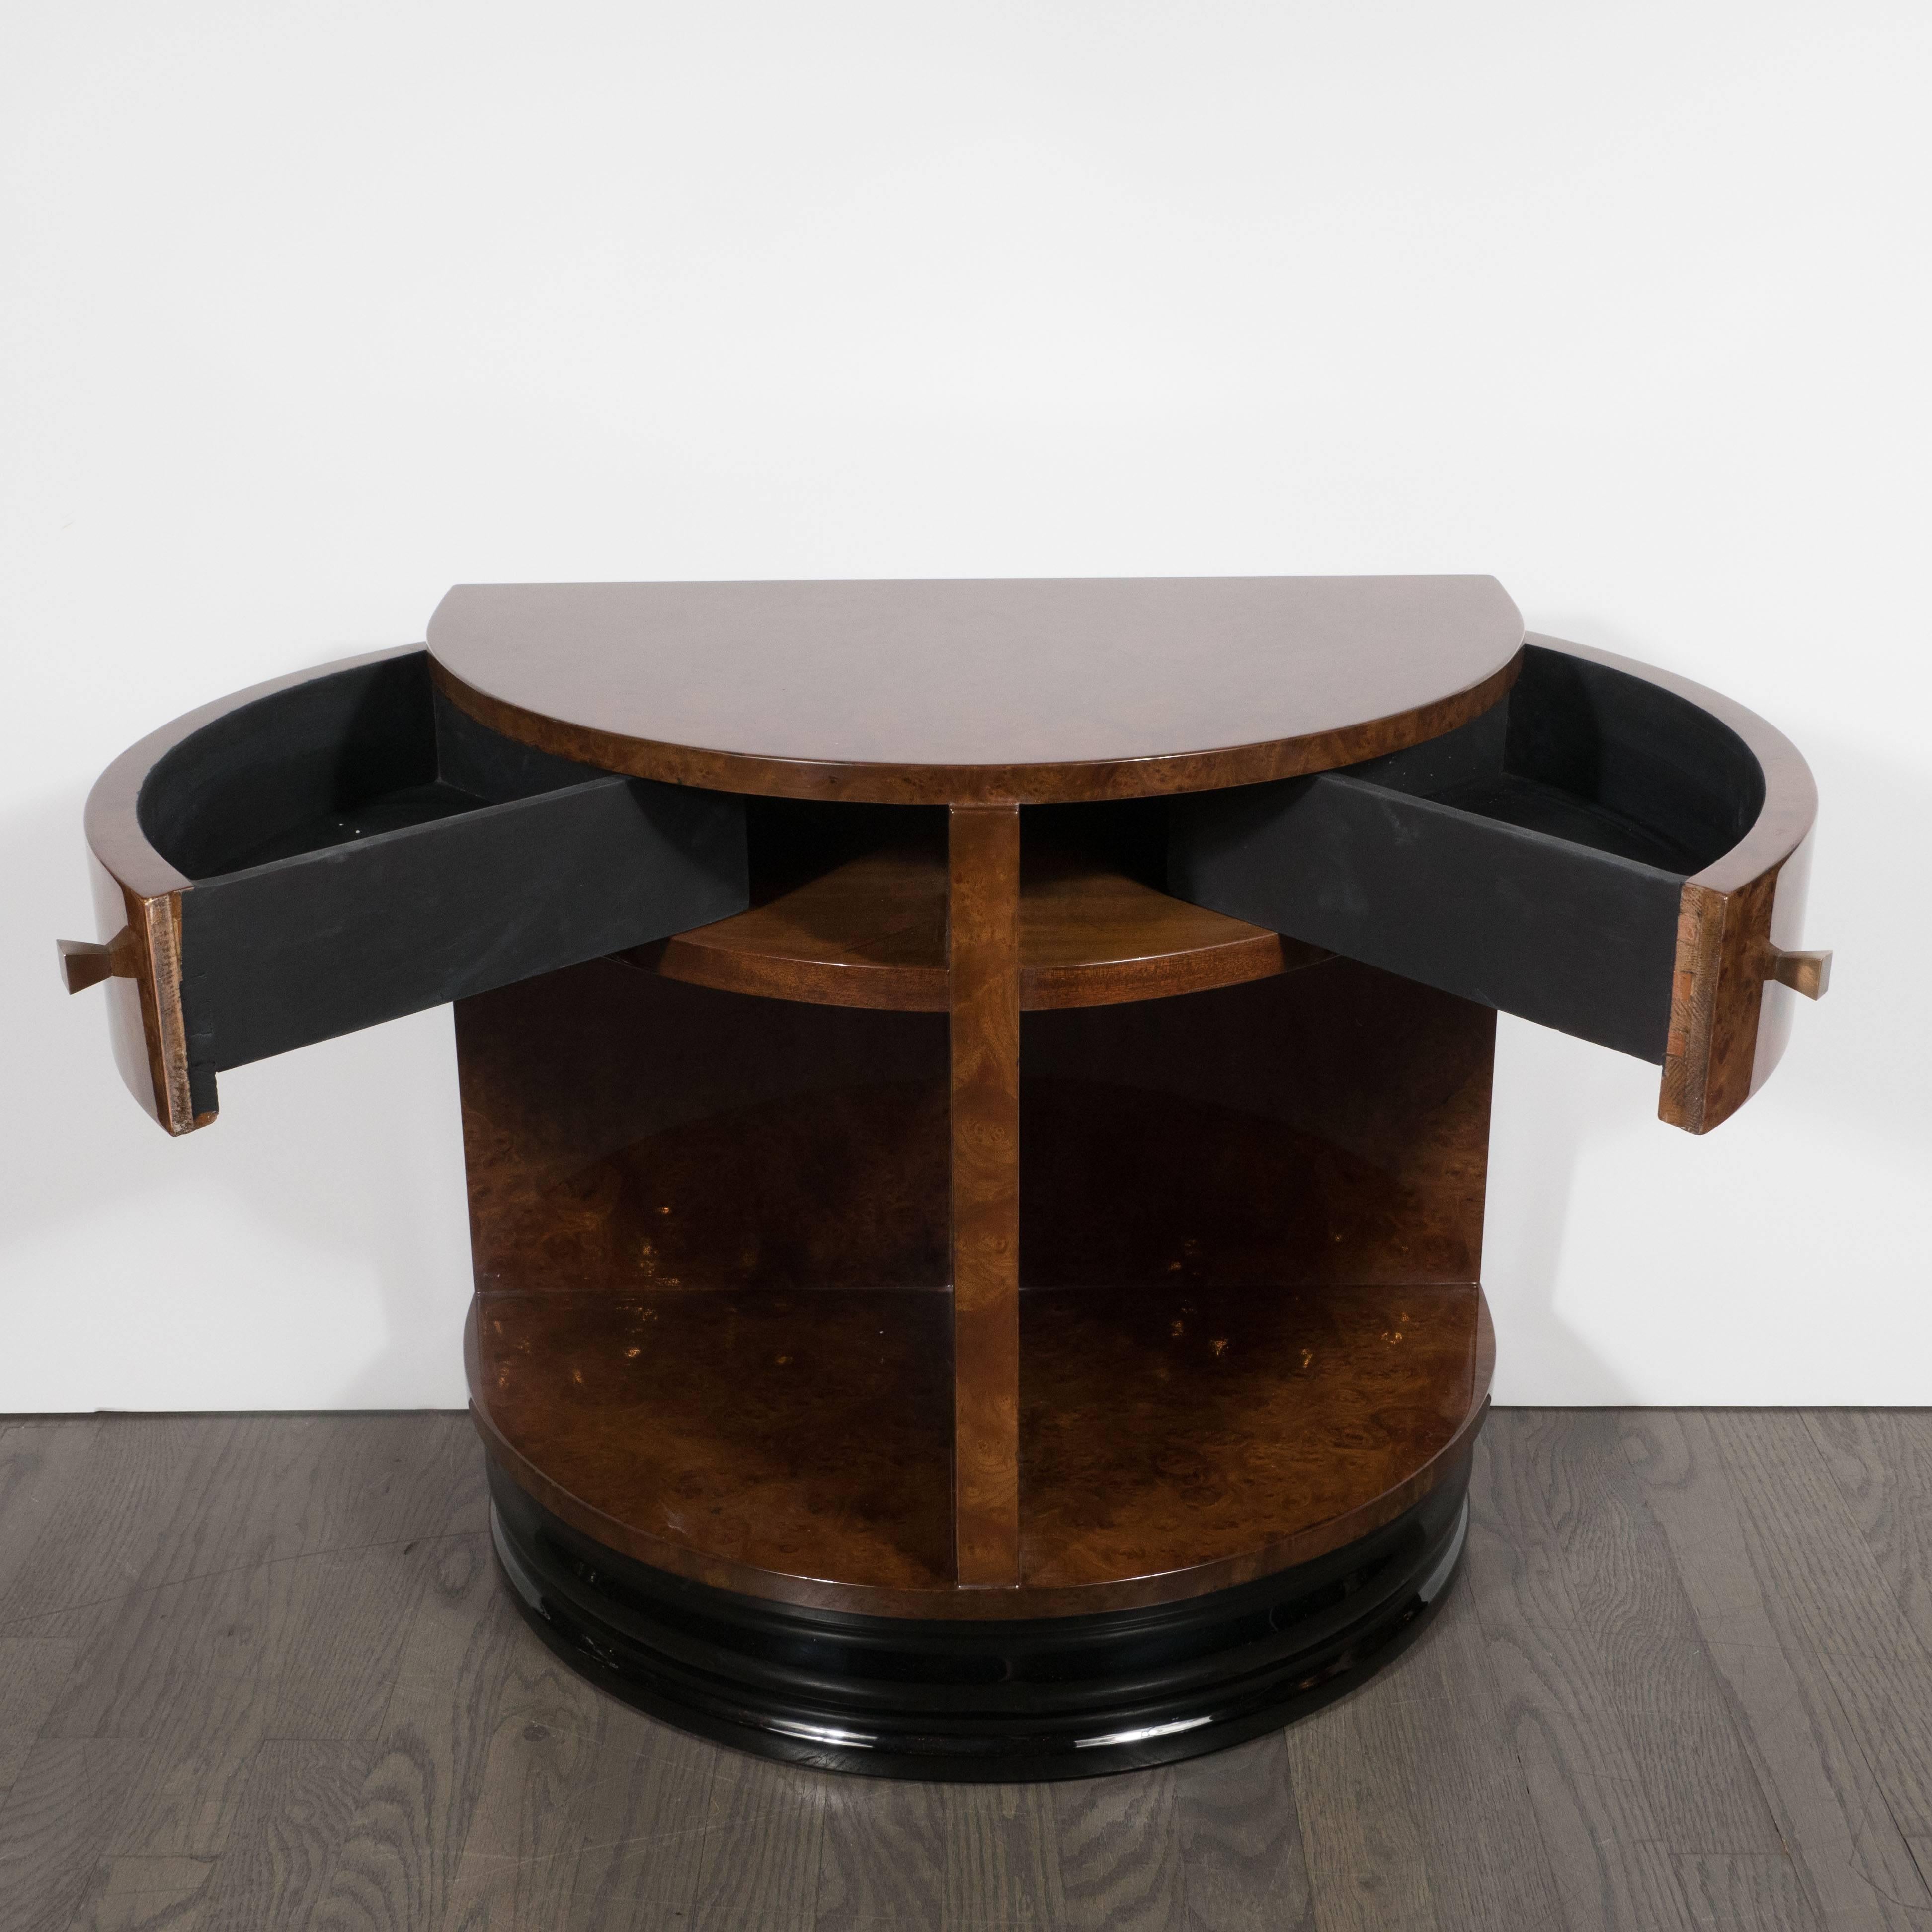 Mid-20th Century Demilune Side Table in Carpathian Elm by Donald Deskey for Widdicomb Co.